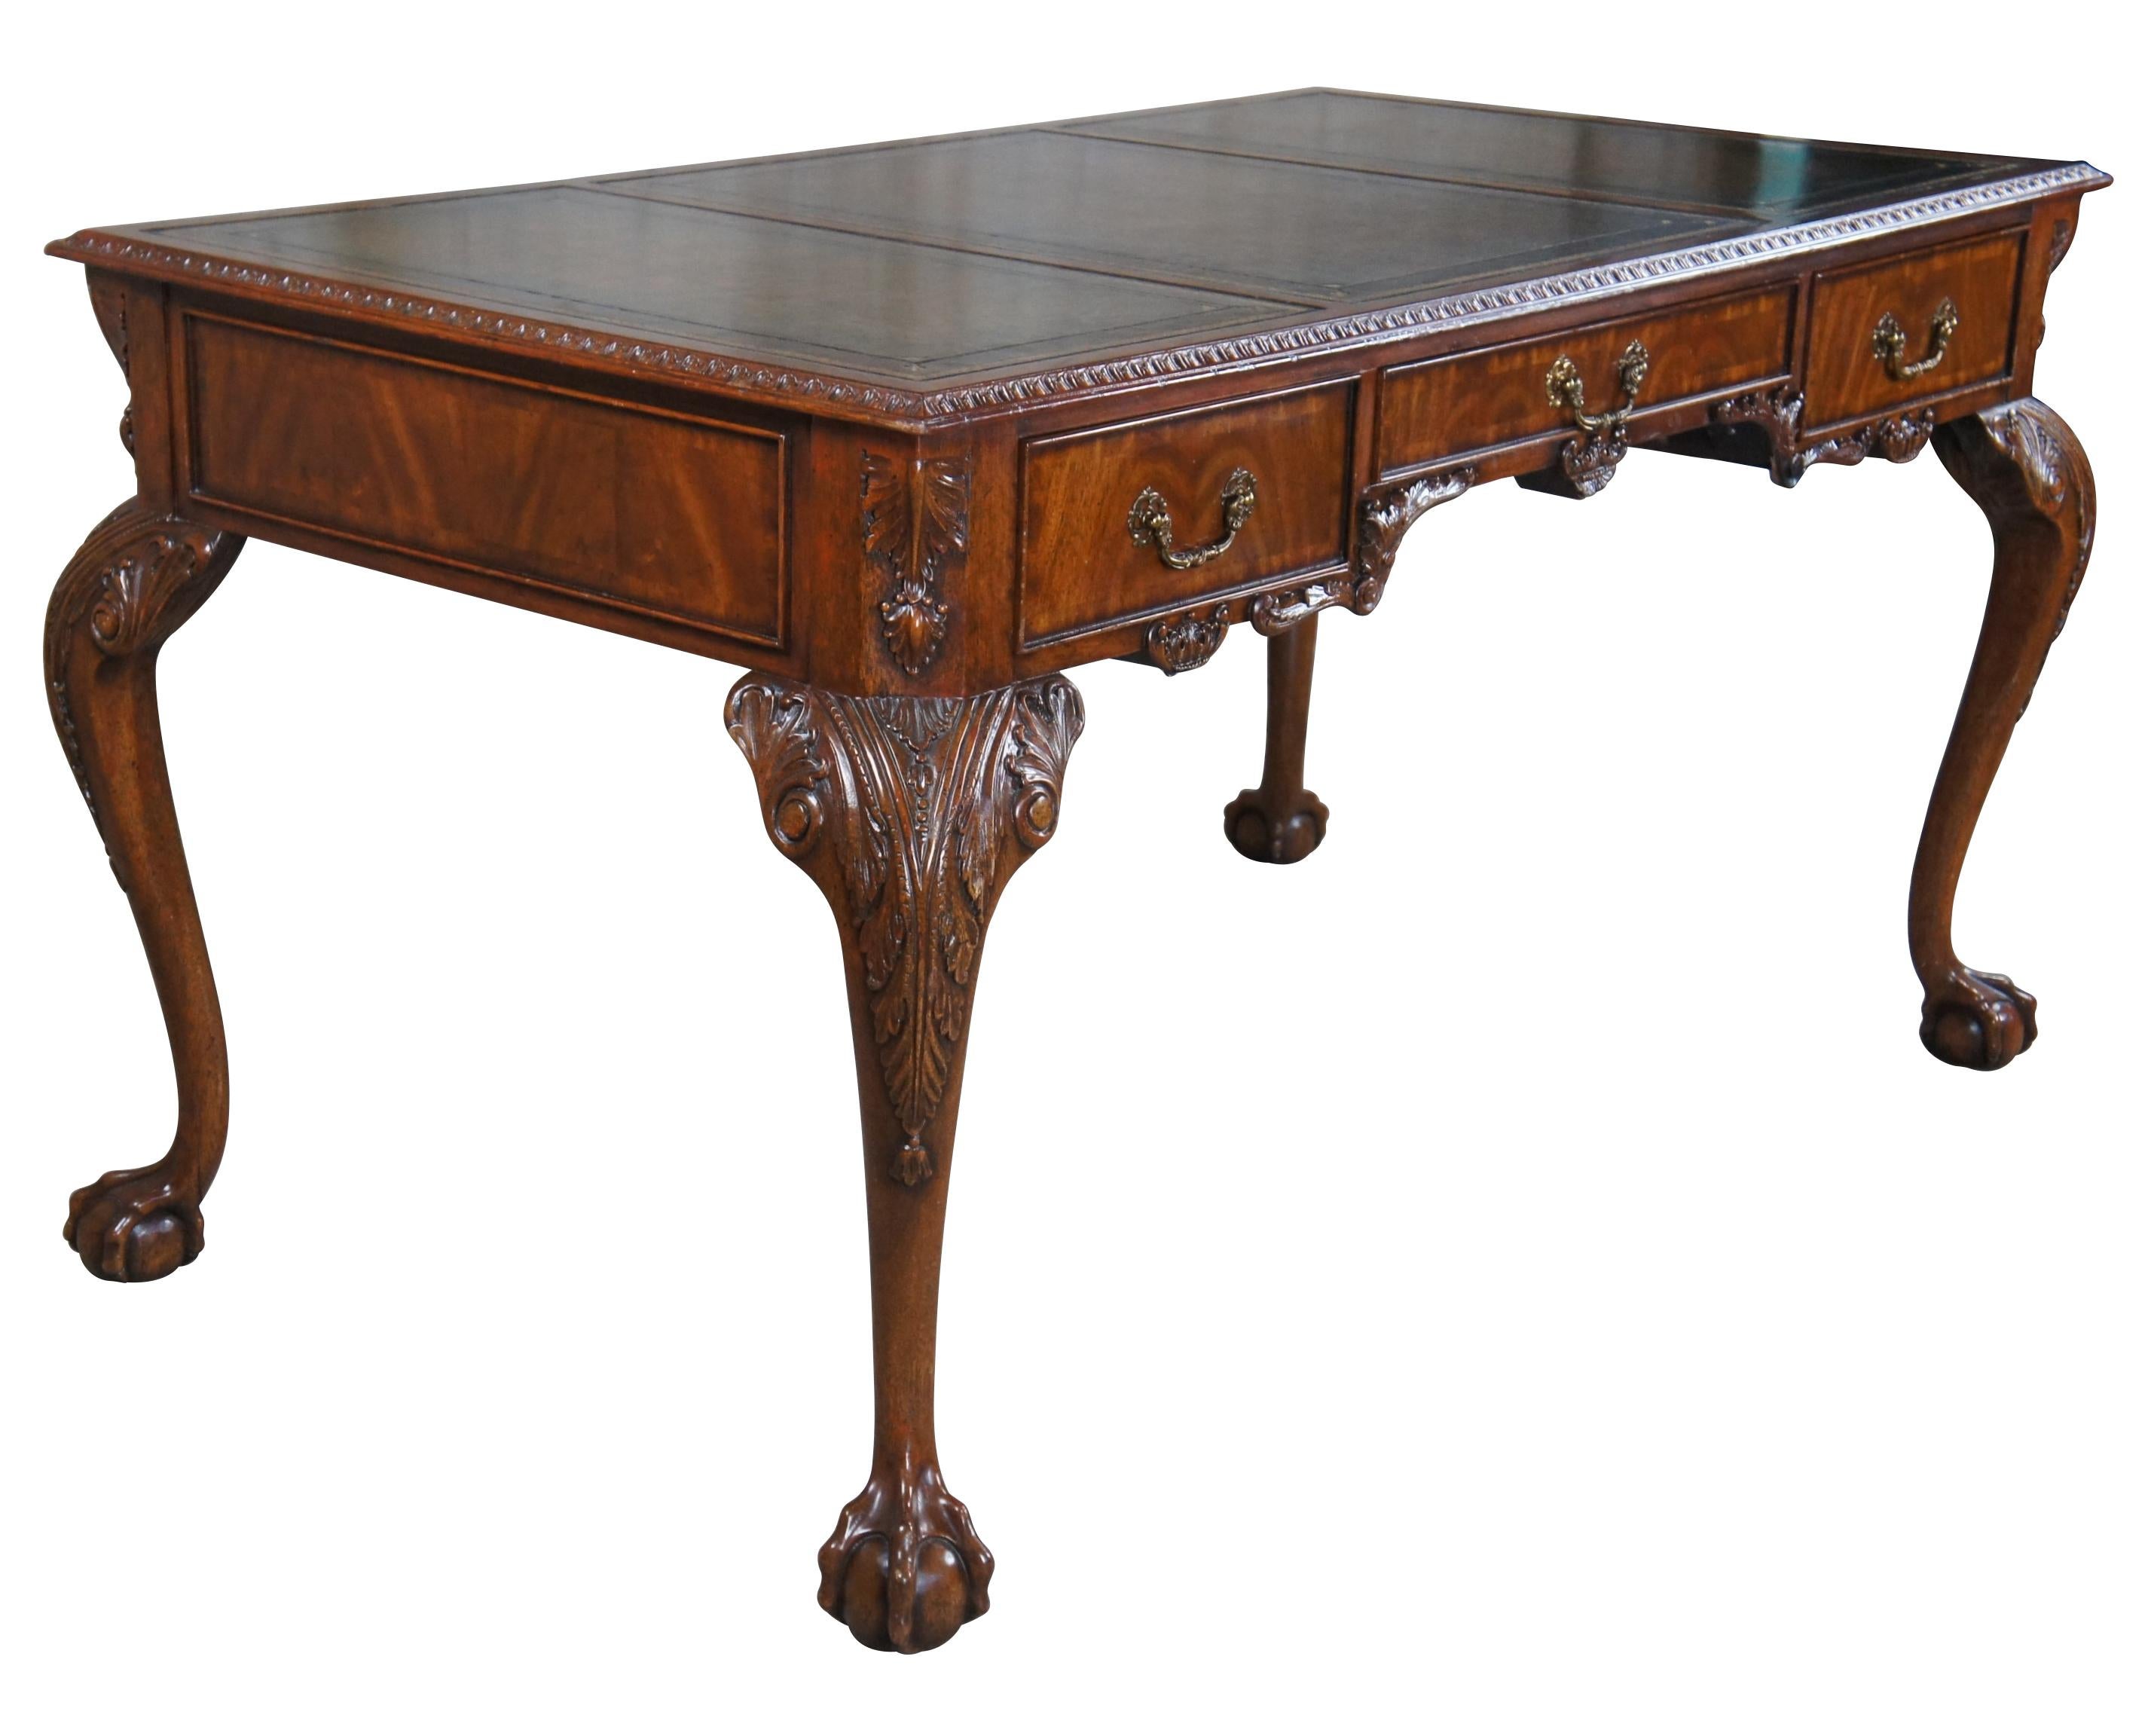 Chippendale style library or office desk by Maitland Smith. Made from mahogany with intricately carved details including high relief acanthus legs leading to ball and claw feet. Features a three panel green / brown and gold tooled leather top with